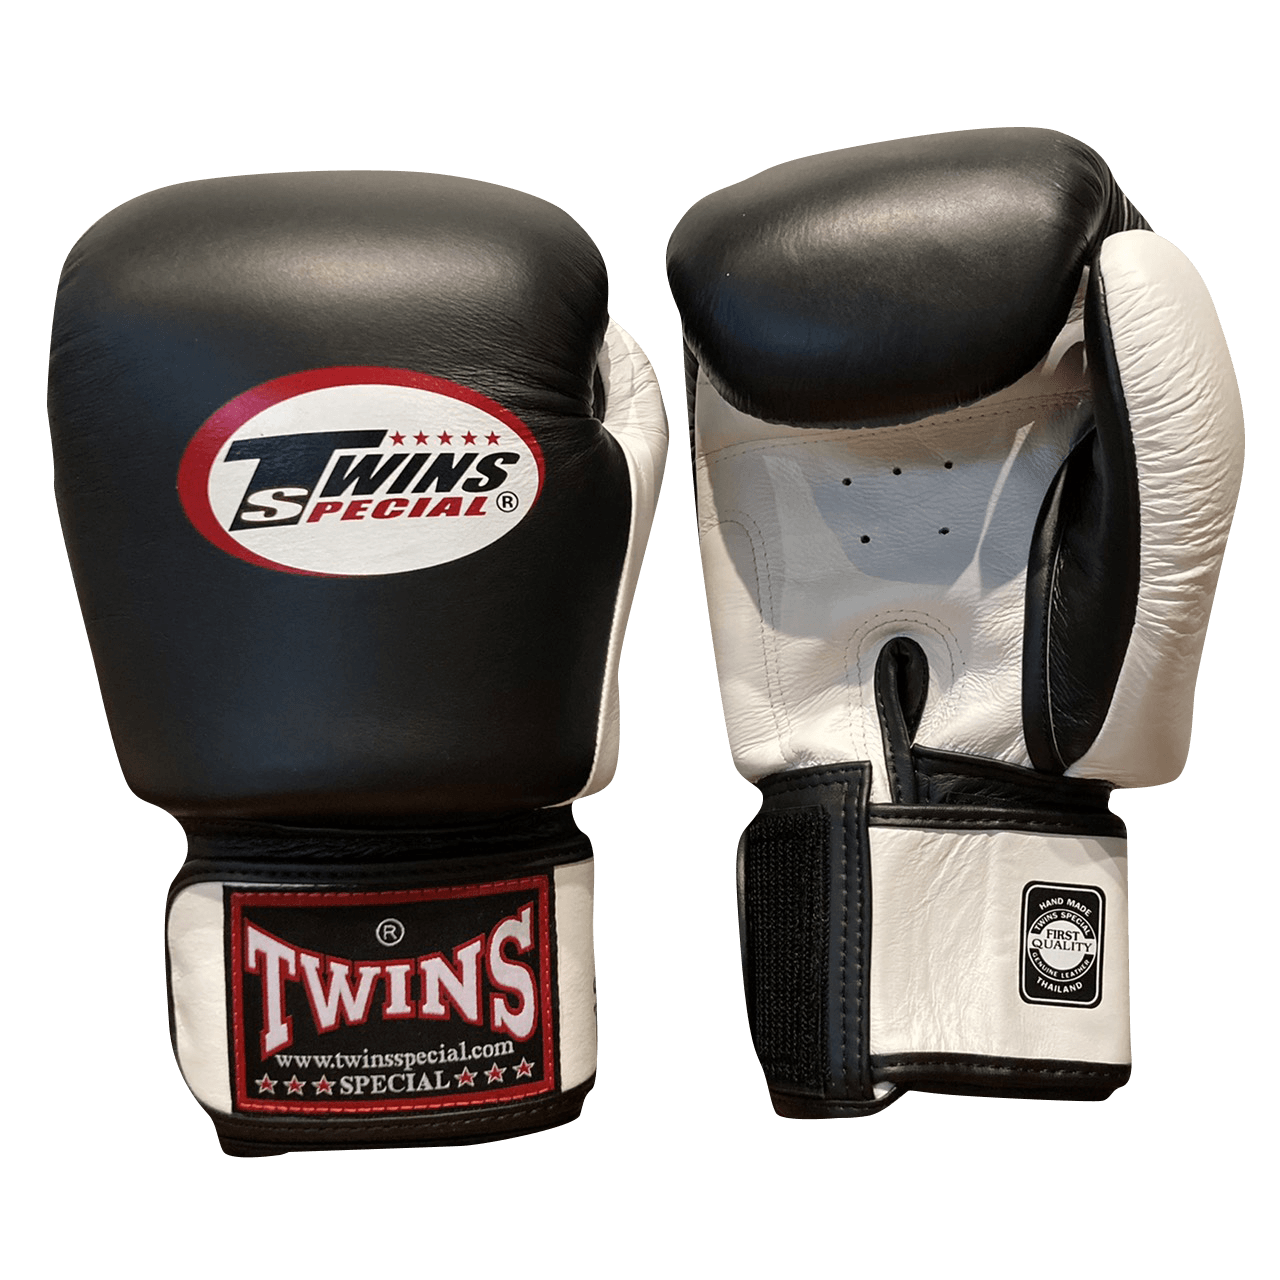 Twins Special Boxing Gloves BGVL3-2T Wh/Bk Black Front